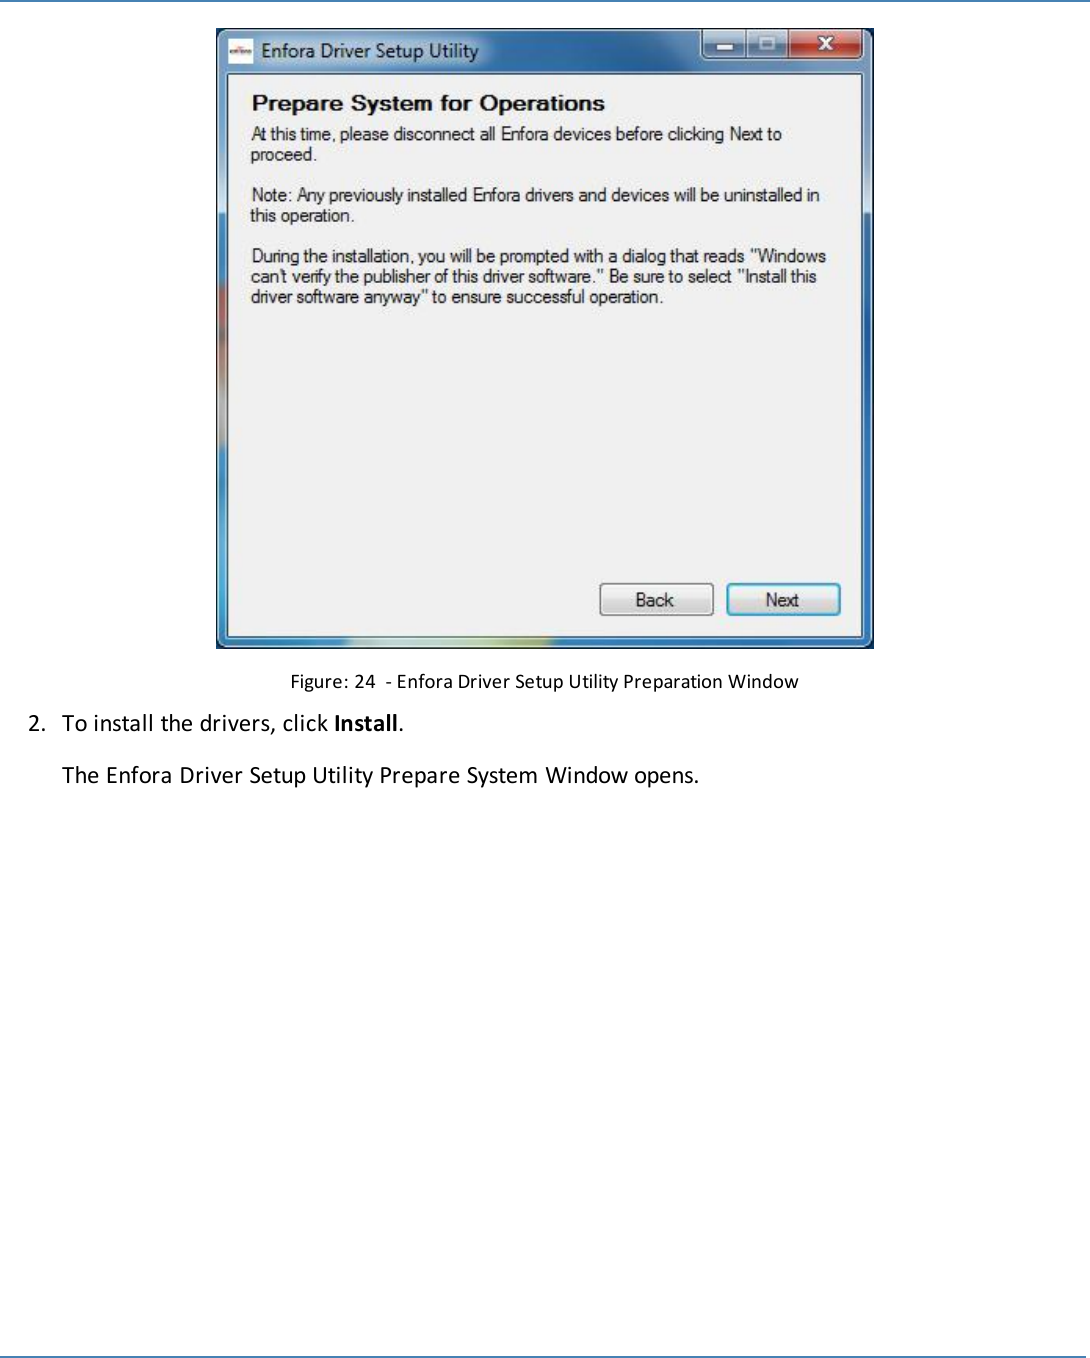 29Figure: 24 - Enfora Driver Setup Utility Preparation Window2. To install the drivers, click Install.The Enfora Driver Setup Utility Prepare System Window opens.